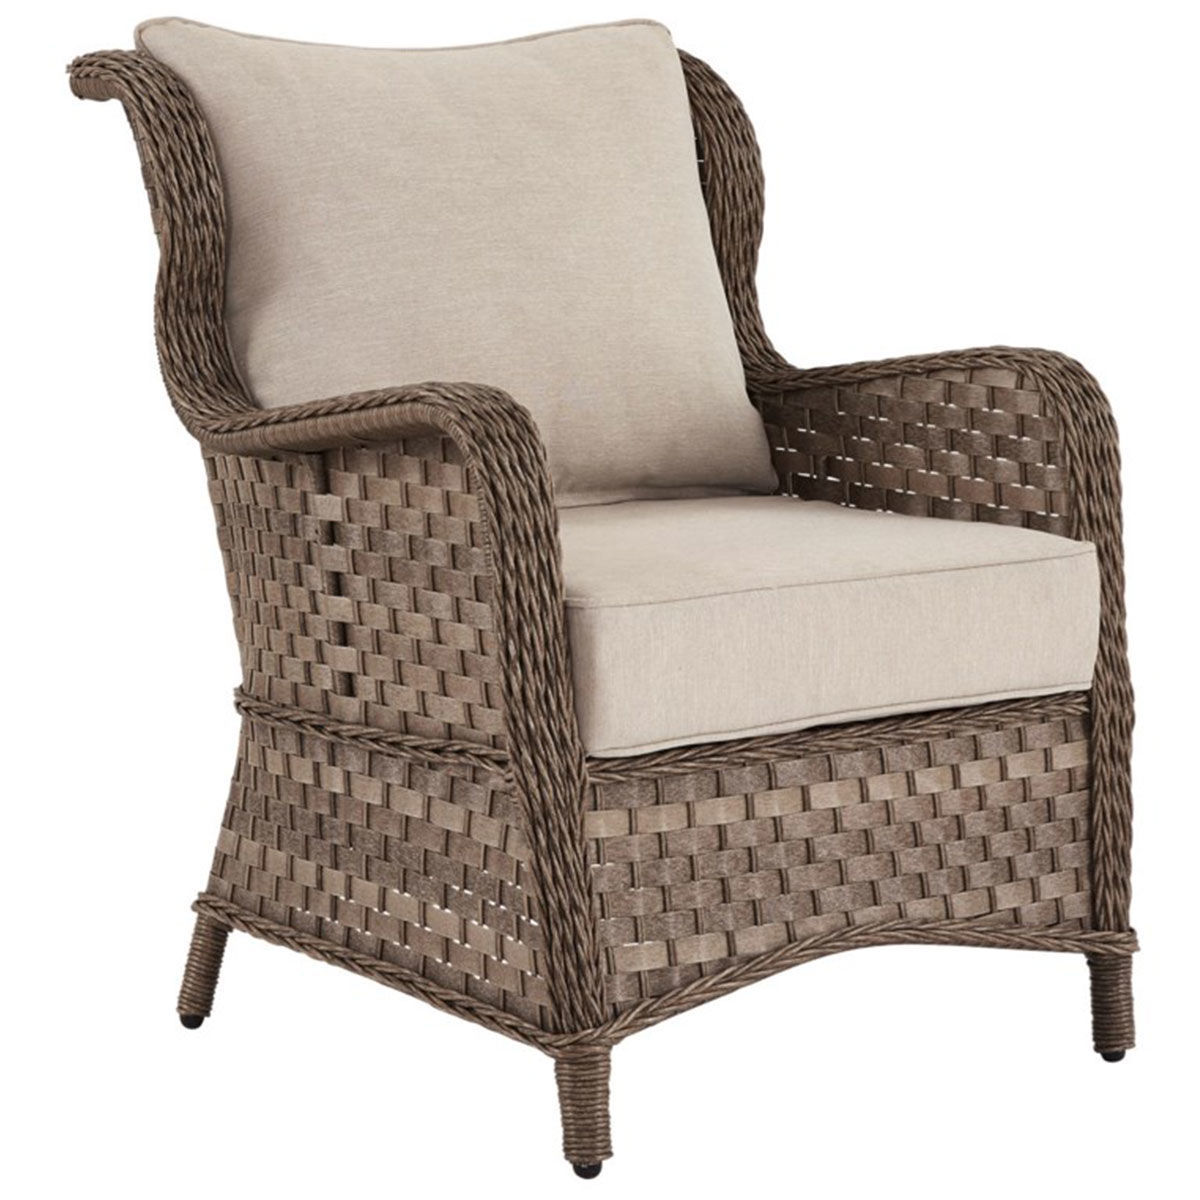 CLEARWATER LOUNGE CHAIR | Lifestyle Furniture by Babette's